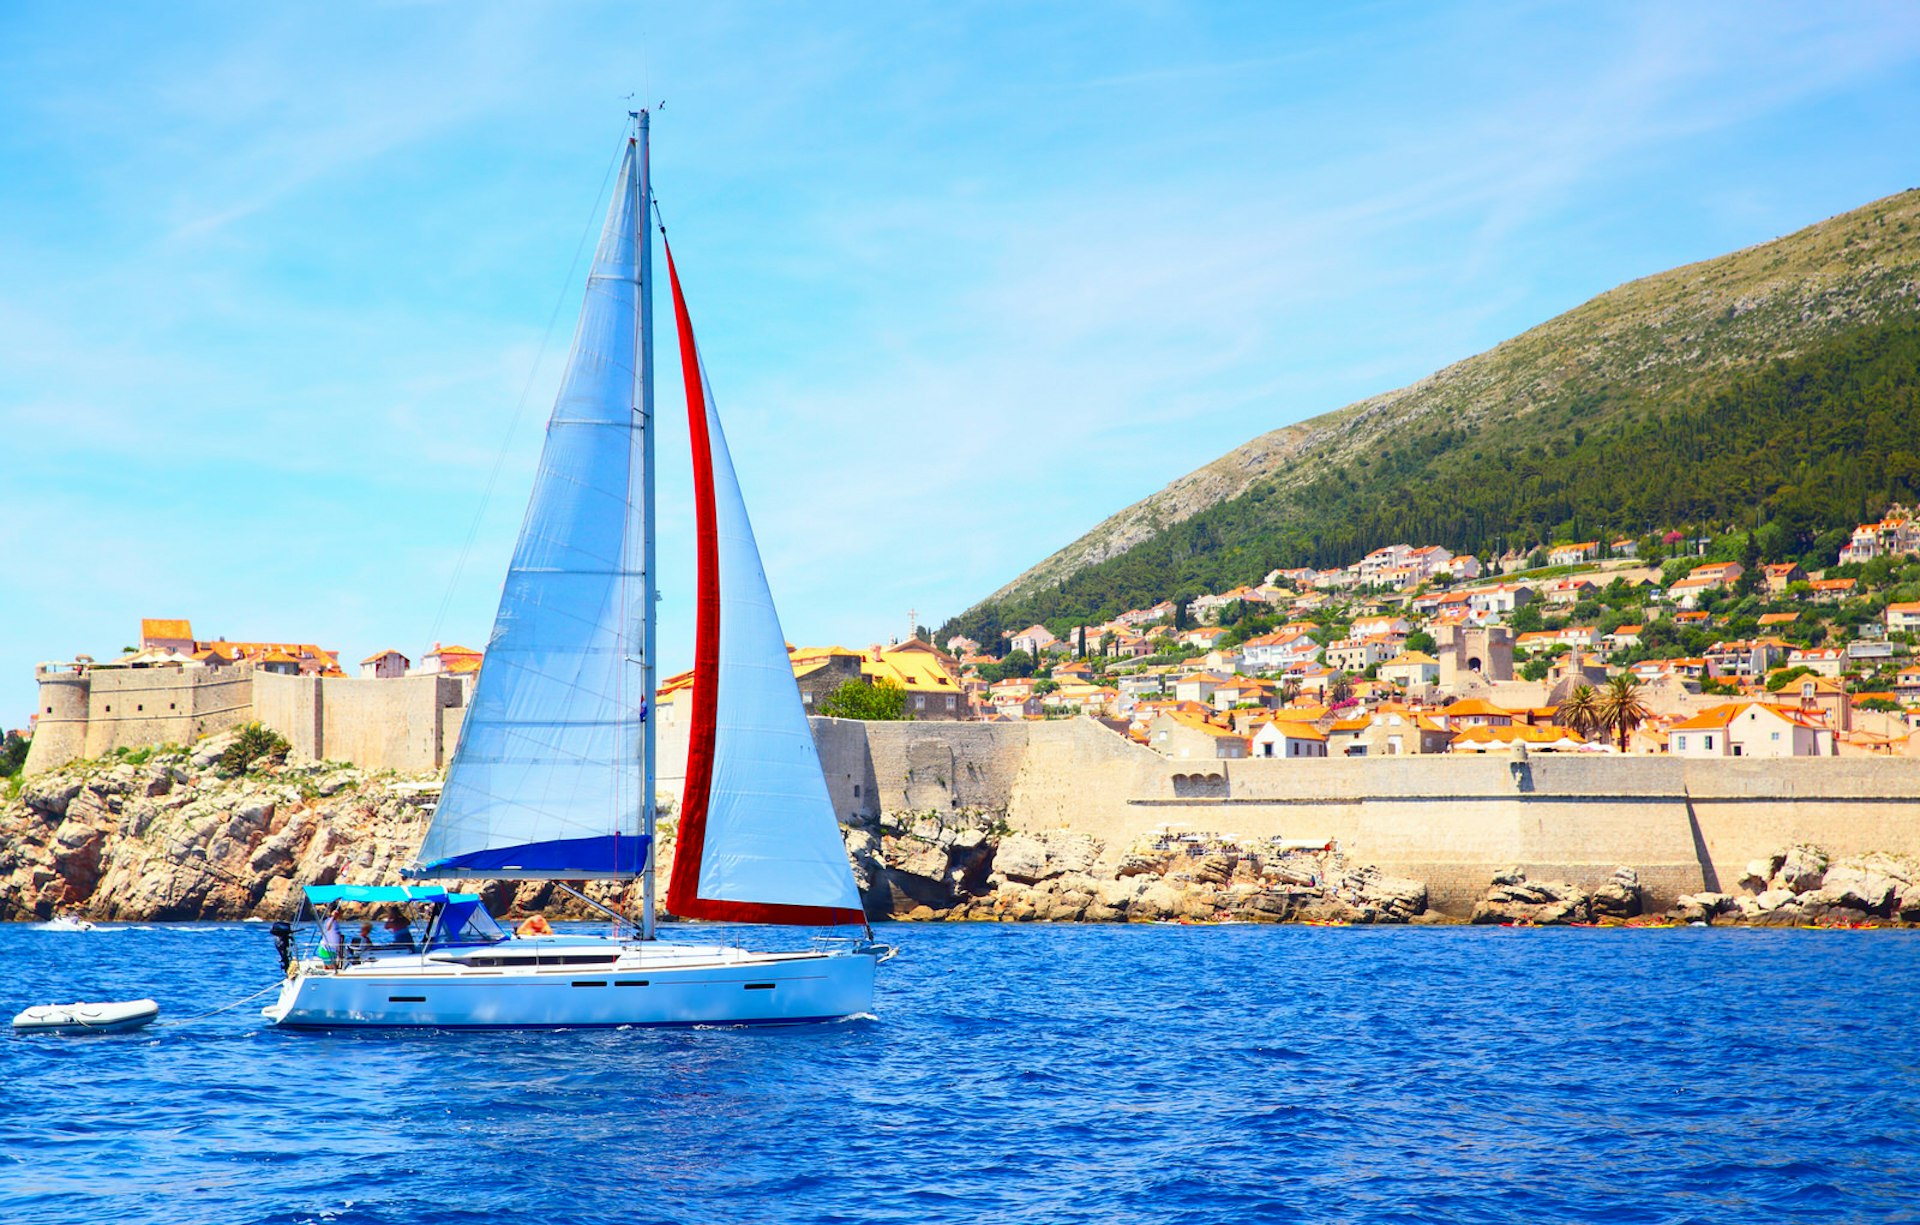 Sailing is a great way to see another side to Dubrovnik